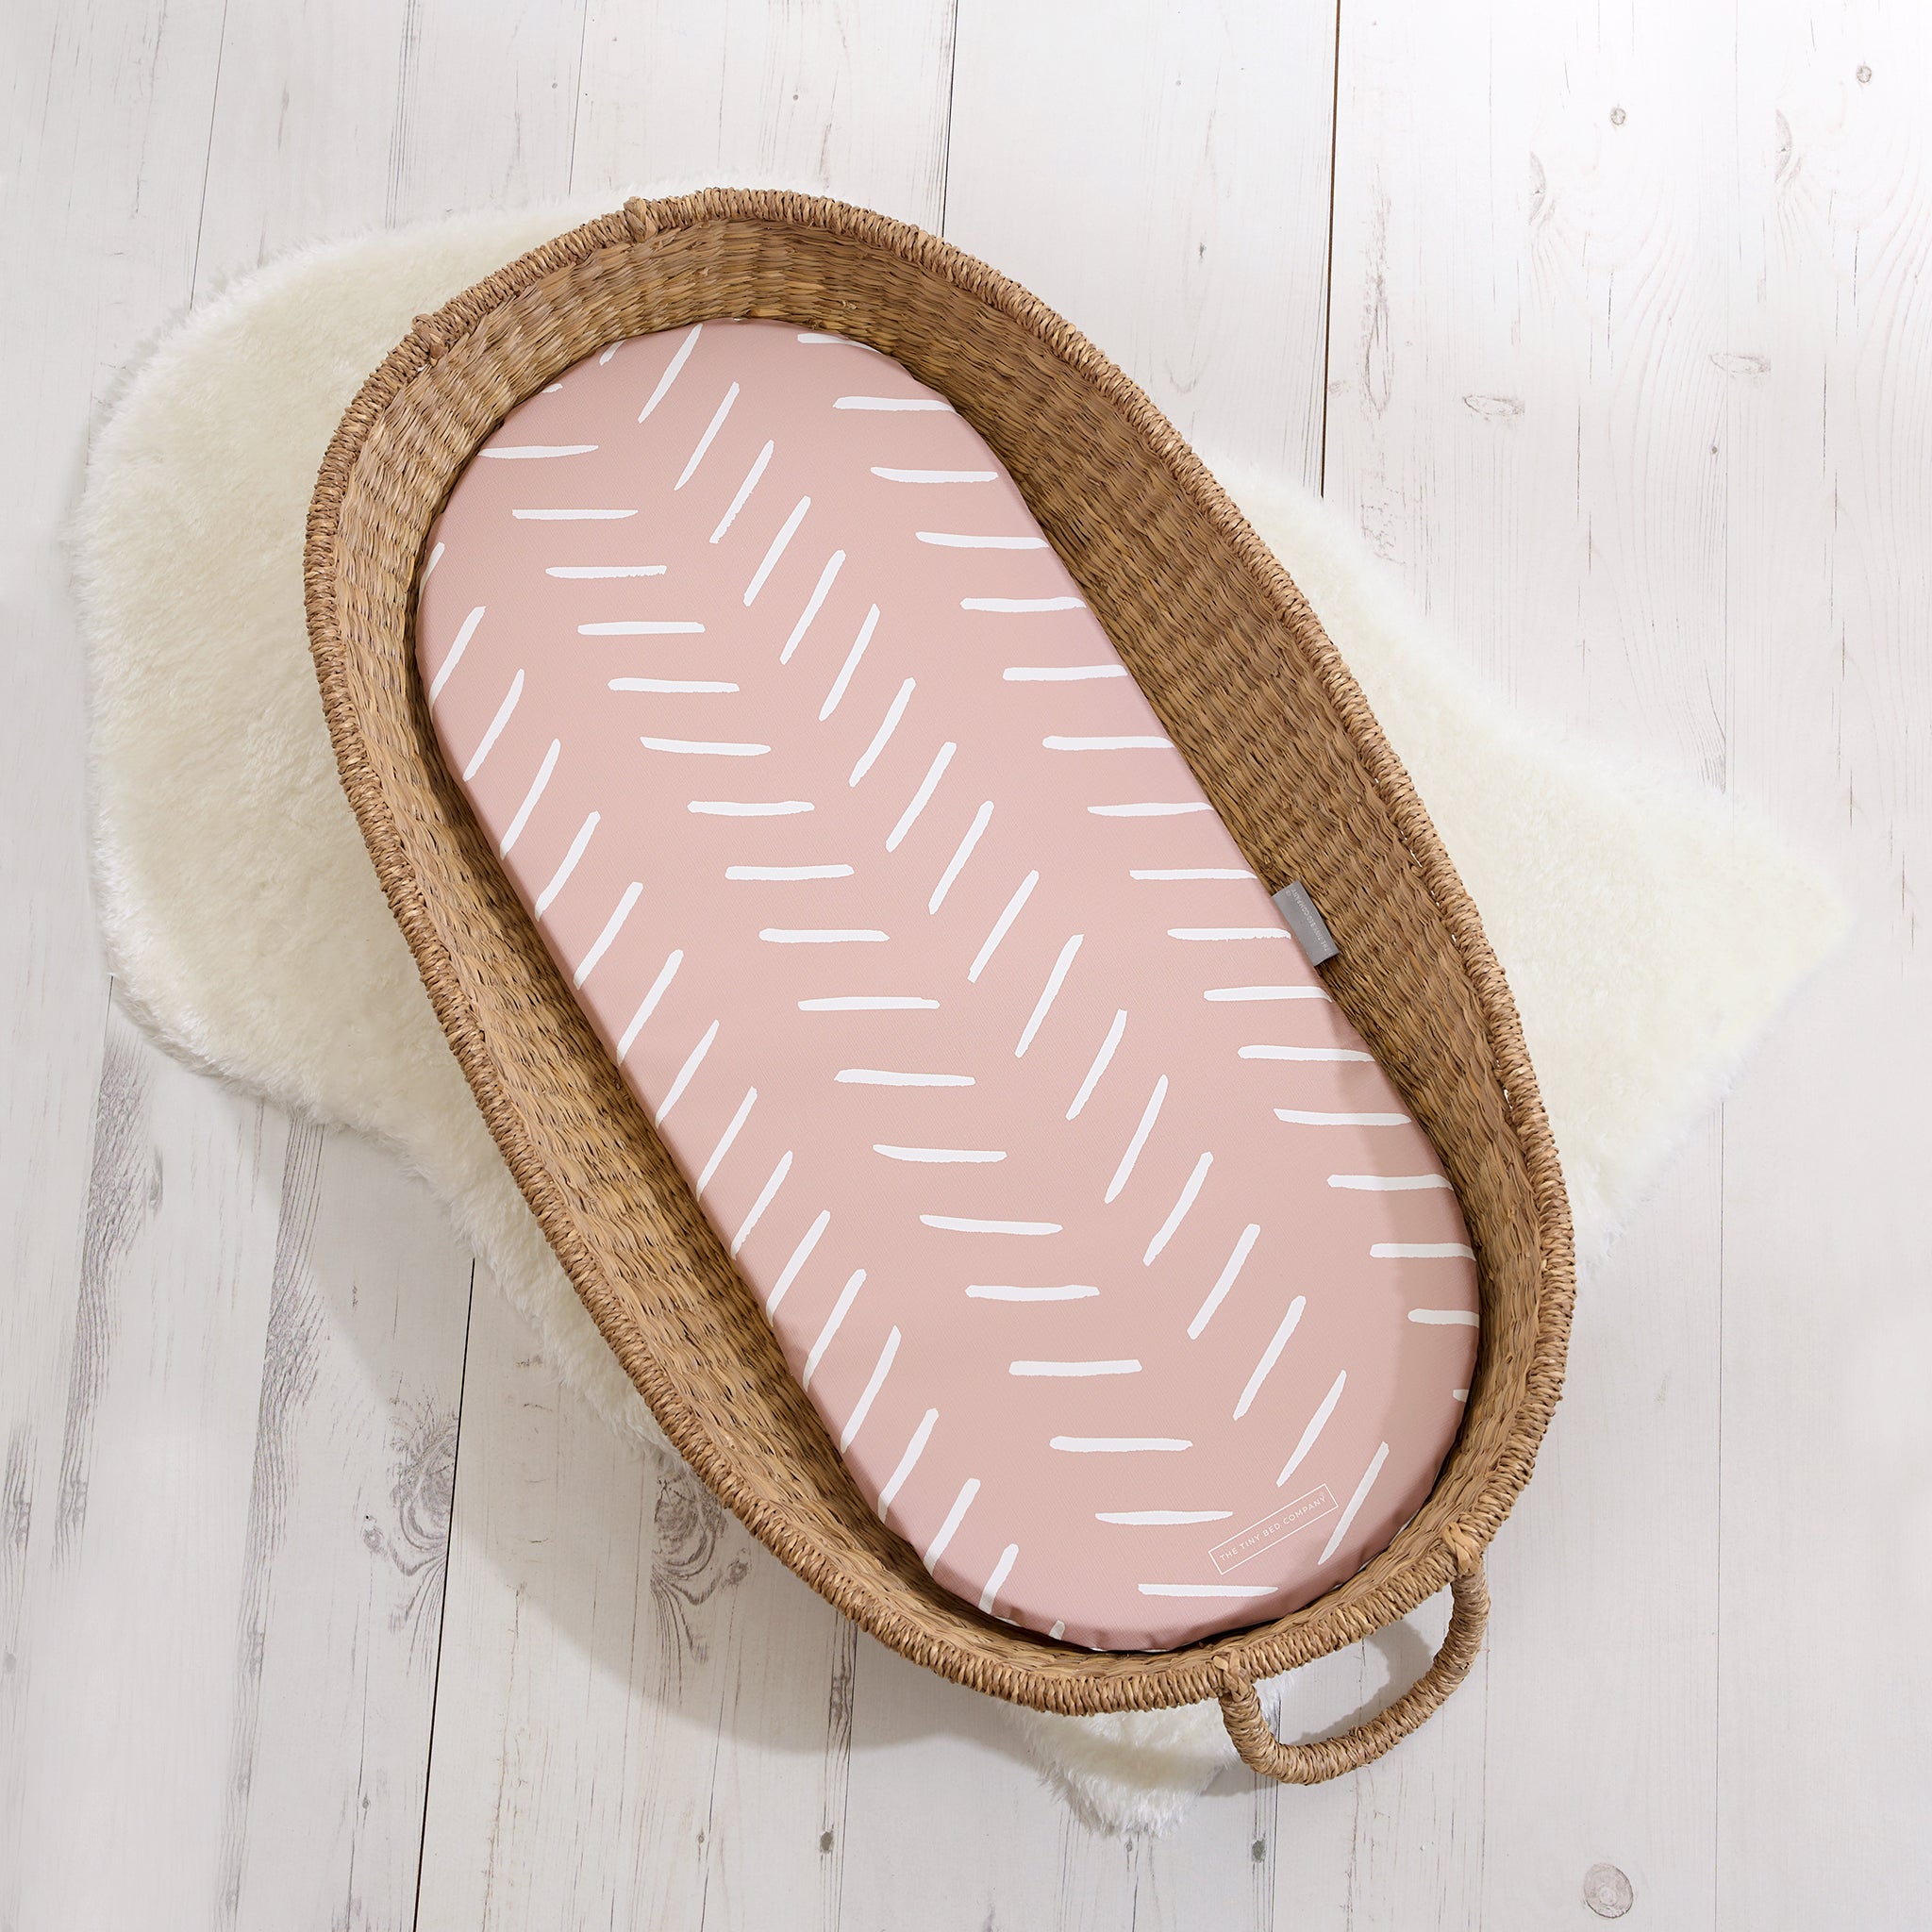 Basket Changing Mat - Castaway (Dusty Pink) - The Tiny Bed Company™